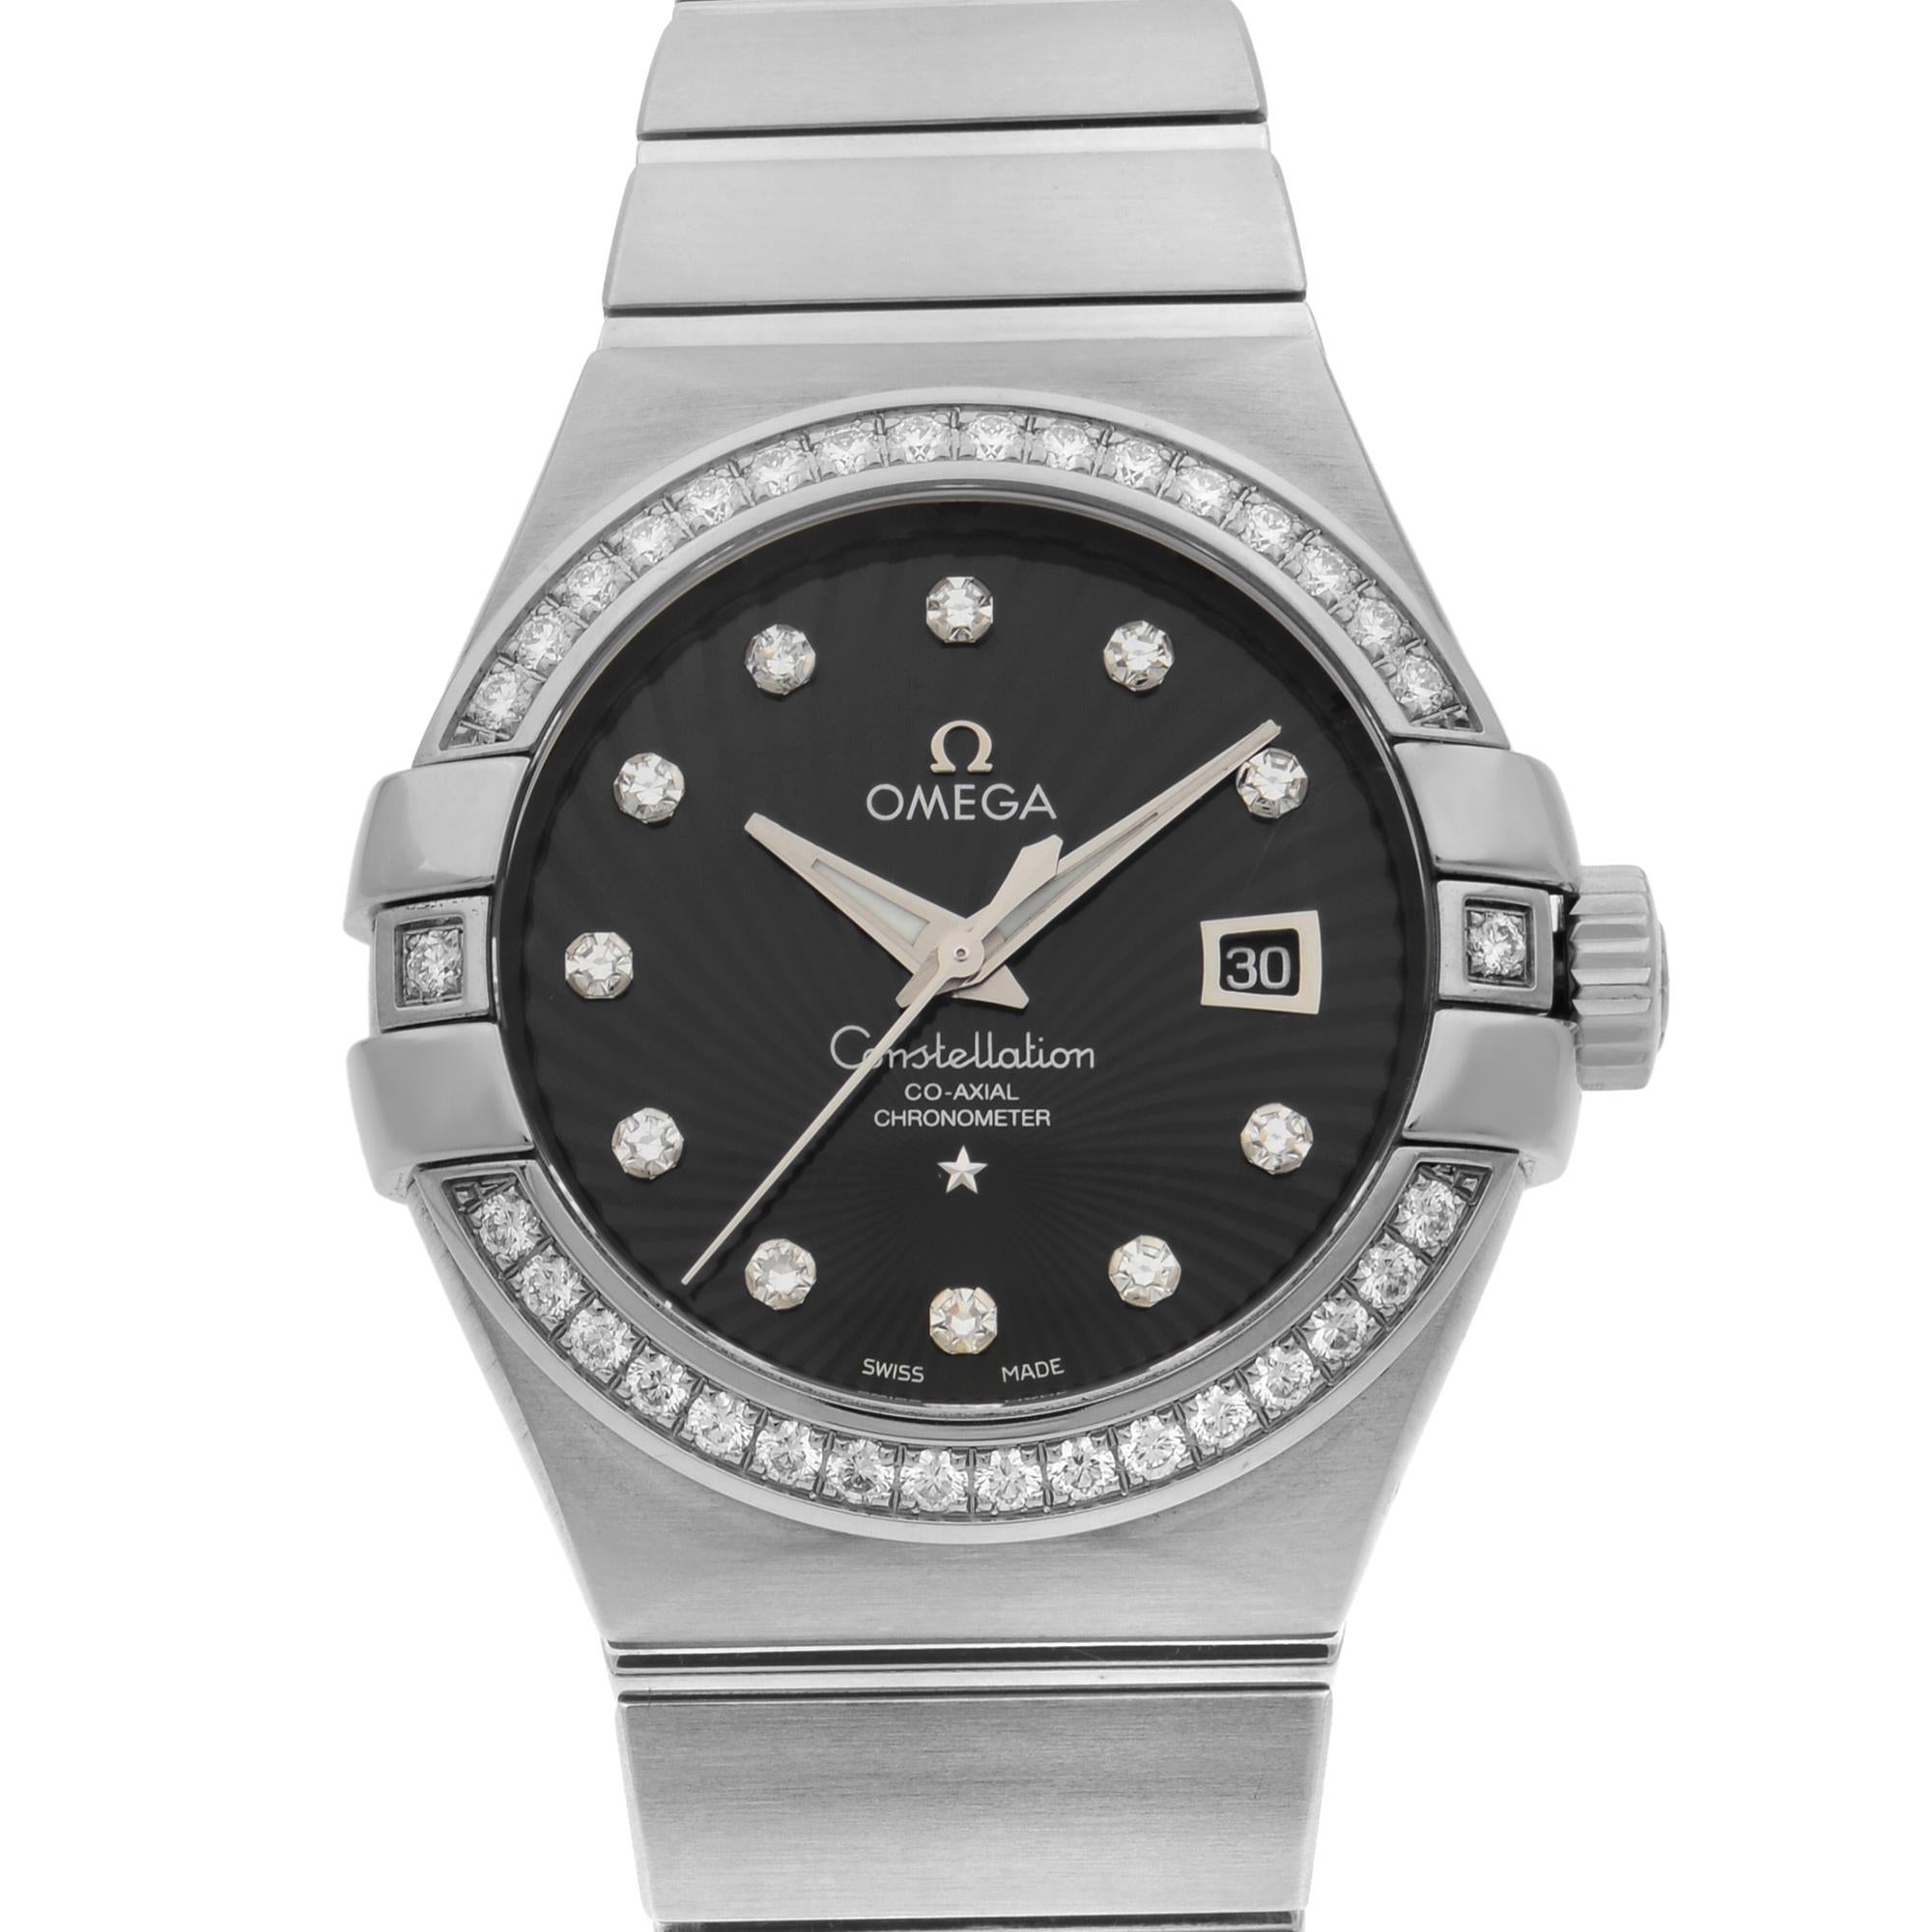 Brand new. This watch comes with an original box and paper.

Brand and Model Information:
Brand: OMEGA
Model Number: 123.55.31.20.51.001

Type and Style:
Department: Women
Style: Luxury
Display: Analog

Design and Aesthetics:
Dial Color: Black
Dial